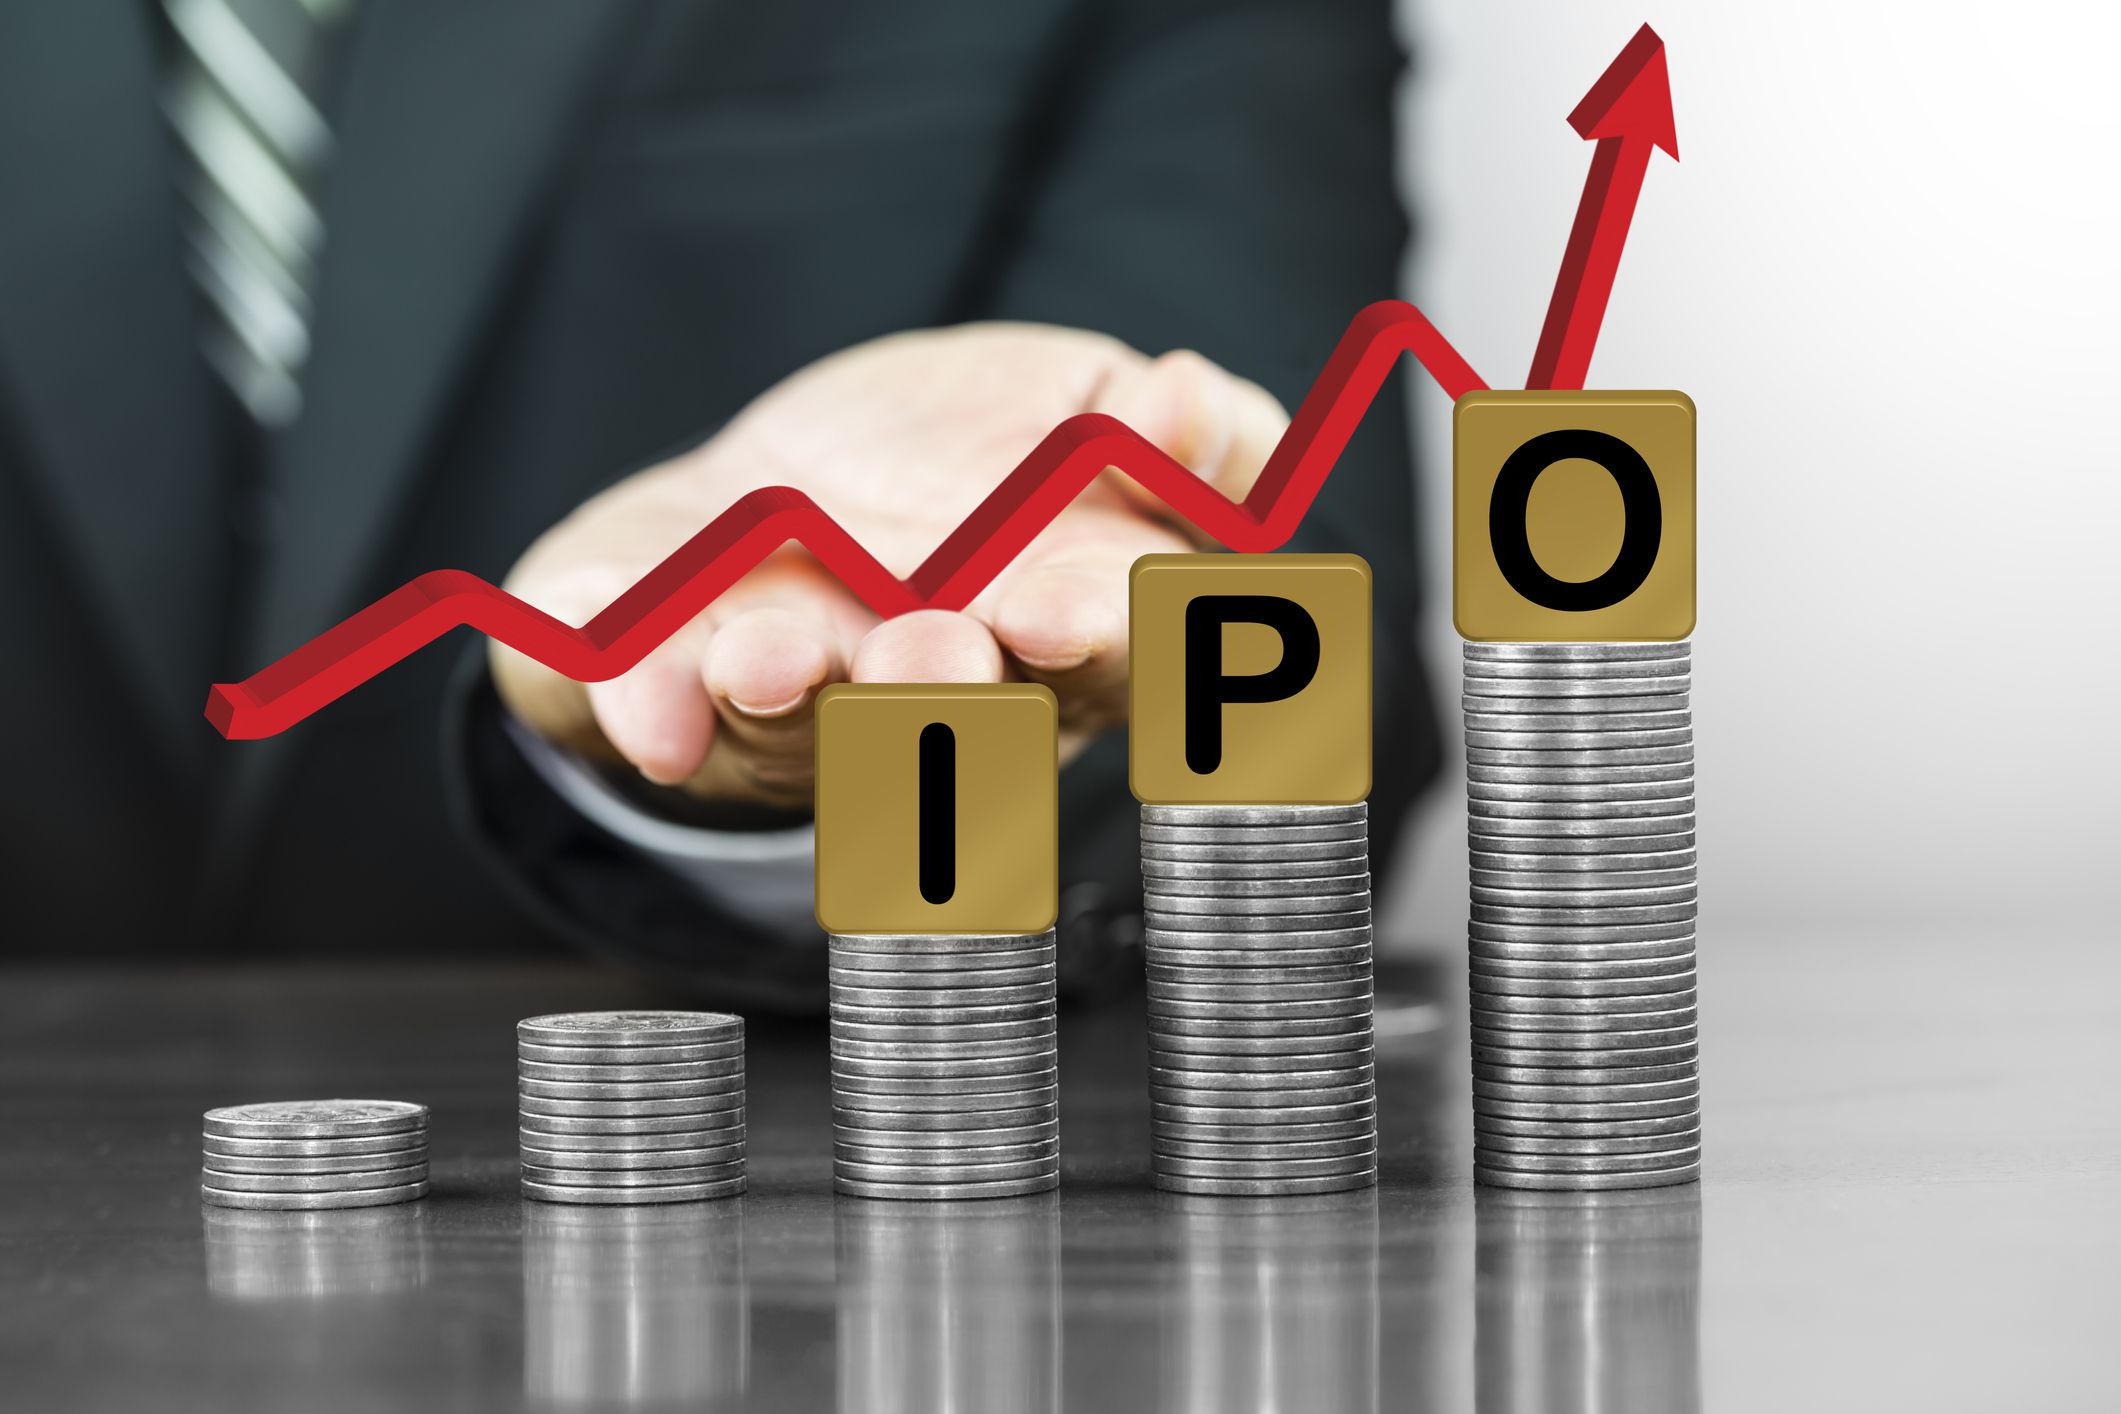 Upakar Microfinance issued IPO for Public